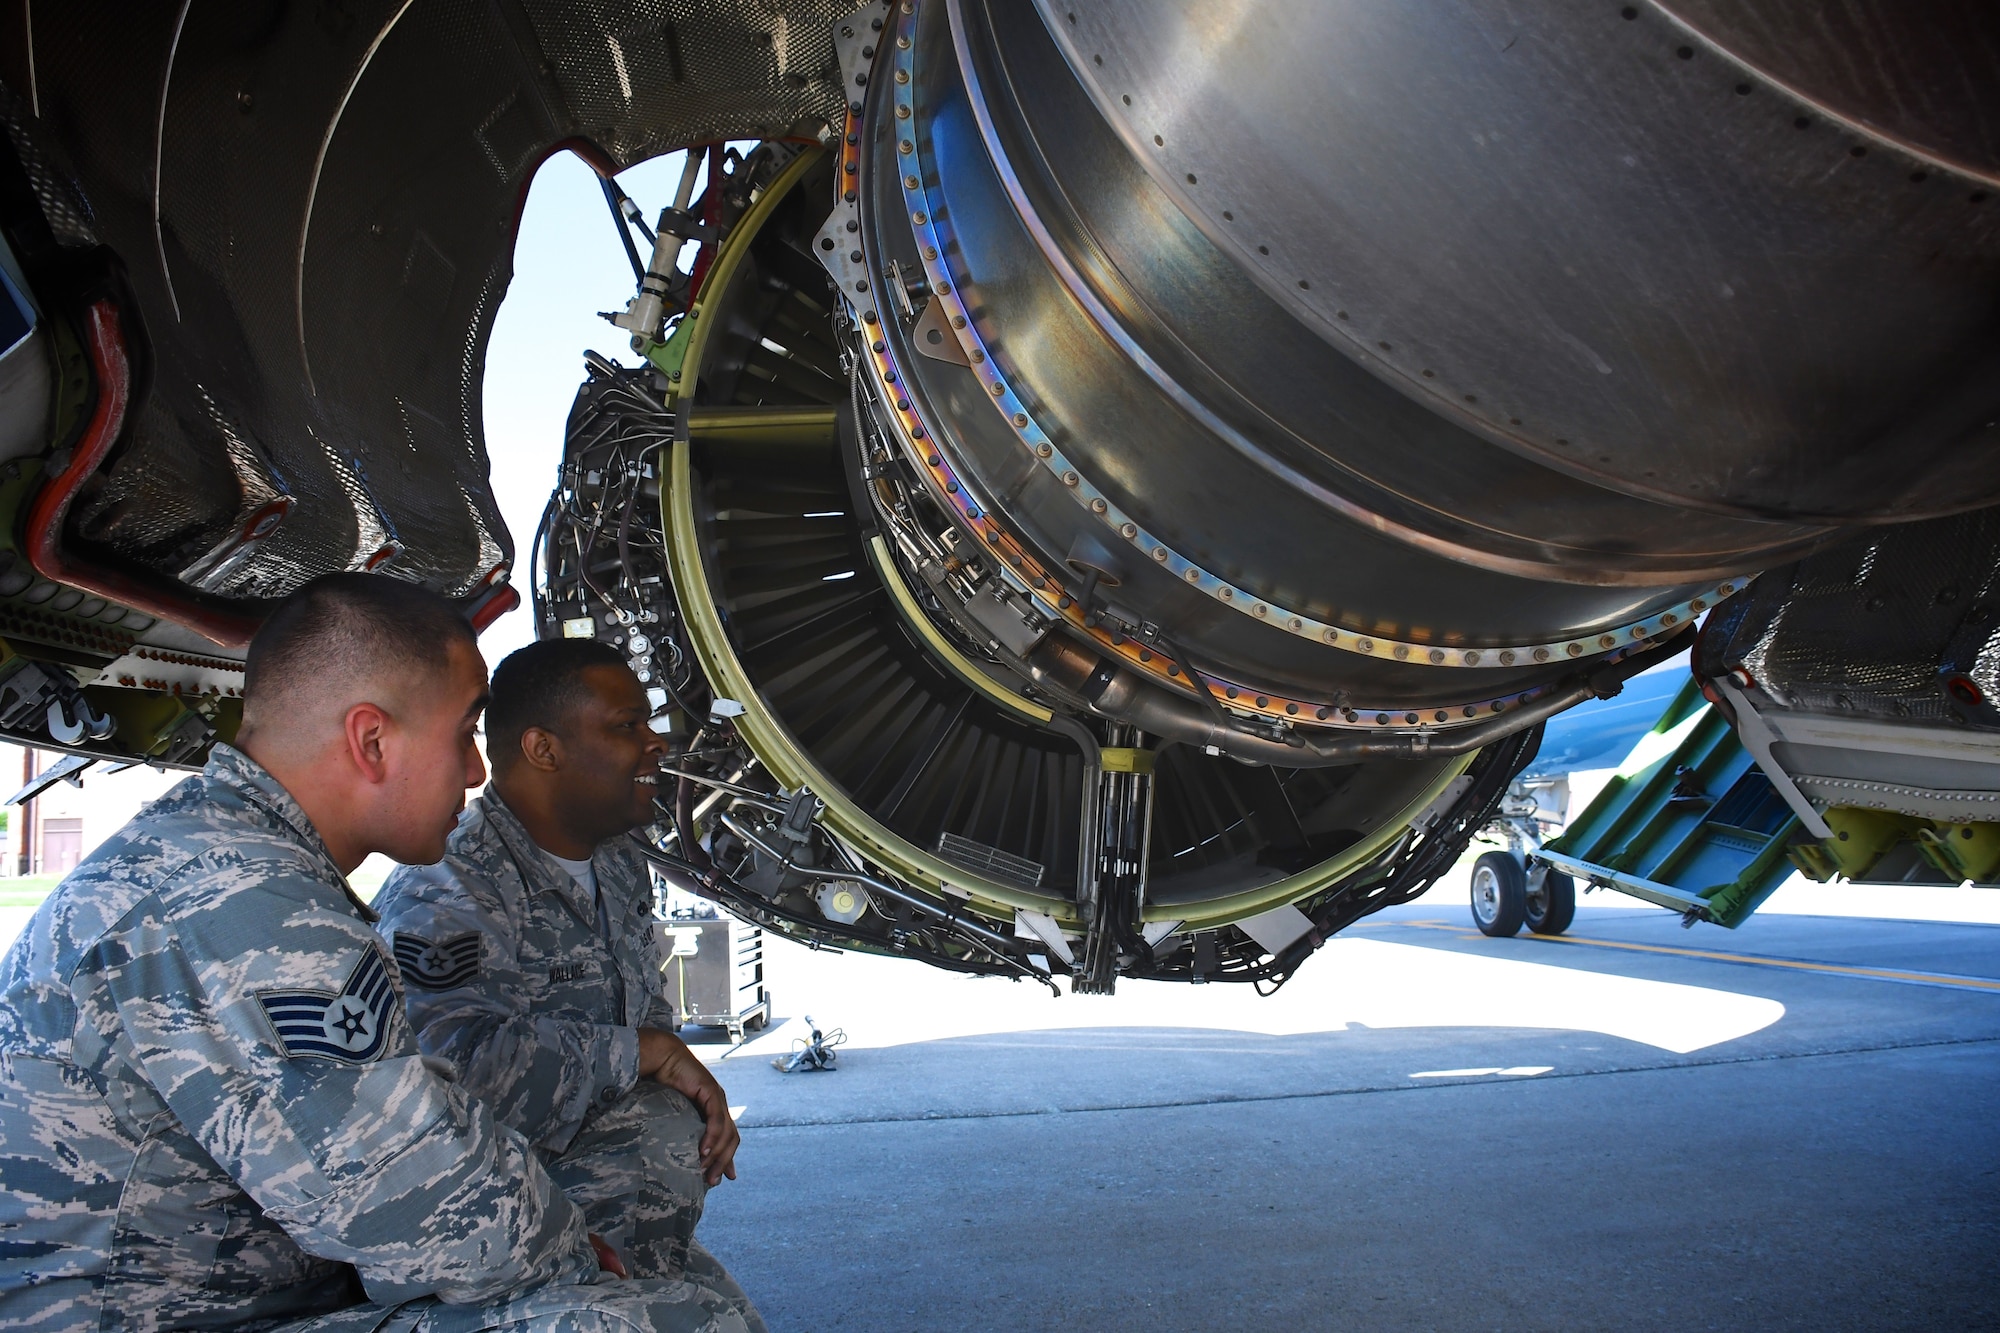 Tech. Sgt. Kenis Wallace, 932nd Maintenance Group C-40 Maintenance Instructor,  provides an open area of the engine to examine for a visitor May 8, 2018, at Scott Air Force Base, Ill.  According to Wallace, "Here at the 932nd Maintenance Group, we provide maintenance training for all of the units that fly the C-40, including active, guard and reserve."  

This time around the 932nd Airlift Wing had five flying crew chiefs from the 15th AMXS at Hickam Air Force Base, and four from the 89th MXG located at Andrews Air Force Base.

"What we were doing was our Flying Crew Chief specialty course, during which we spend two weeks providing advanced training for Active Duty Flying Crew Chiefs. We provide training on scenarios and troubleshooting that may happen when they're out with an aircraft on the road (traveling)," said Wallace.  While a recent FOD (foreign object damage) walk was going on, 932nd MXG members were training their visiting guests on opening engine fan cowls and thrust reversers. 

"With the engines opened we trained component location and identification on the core of the engine," said Wallace.

He pays attention to detail every day in all conditions, no matter if it is the coldest day in the winter, or hottest day in summer, and enjoys his work at Scott Air Force Base.  "As far as what I love about my job, it is the people.  Maintainers work hard and play hard even when its hot and 100 degrees out and everyone is trying to get the job done, at the end of the day everyone is like your family and you can always have a laugh," Wallace added.

(U.S. Air Force photo by Lt. Col. Stan Paregien)